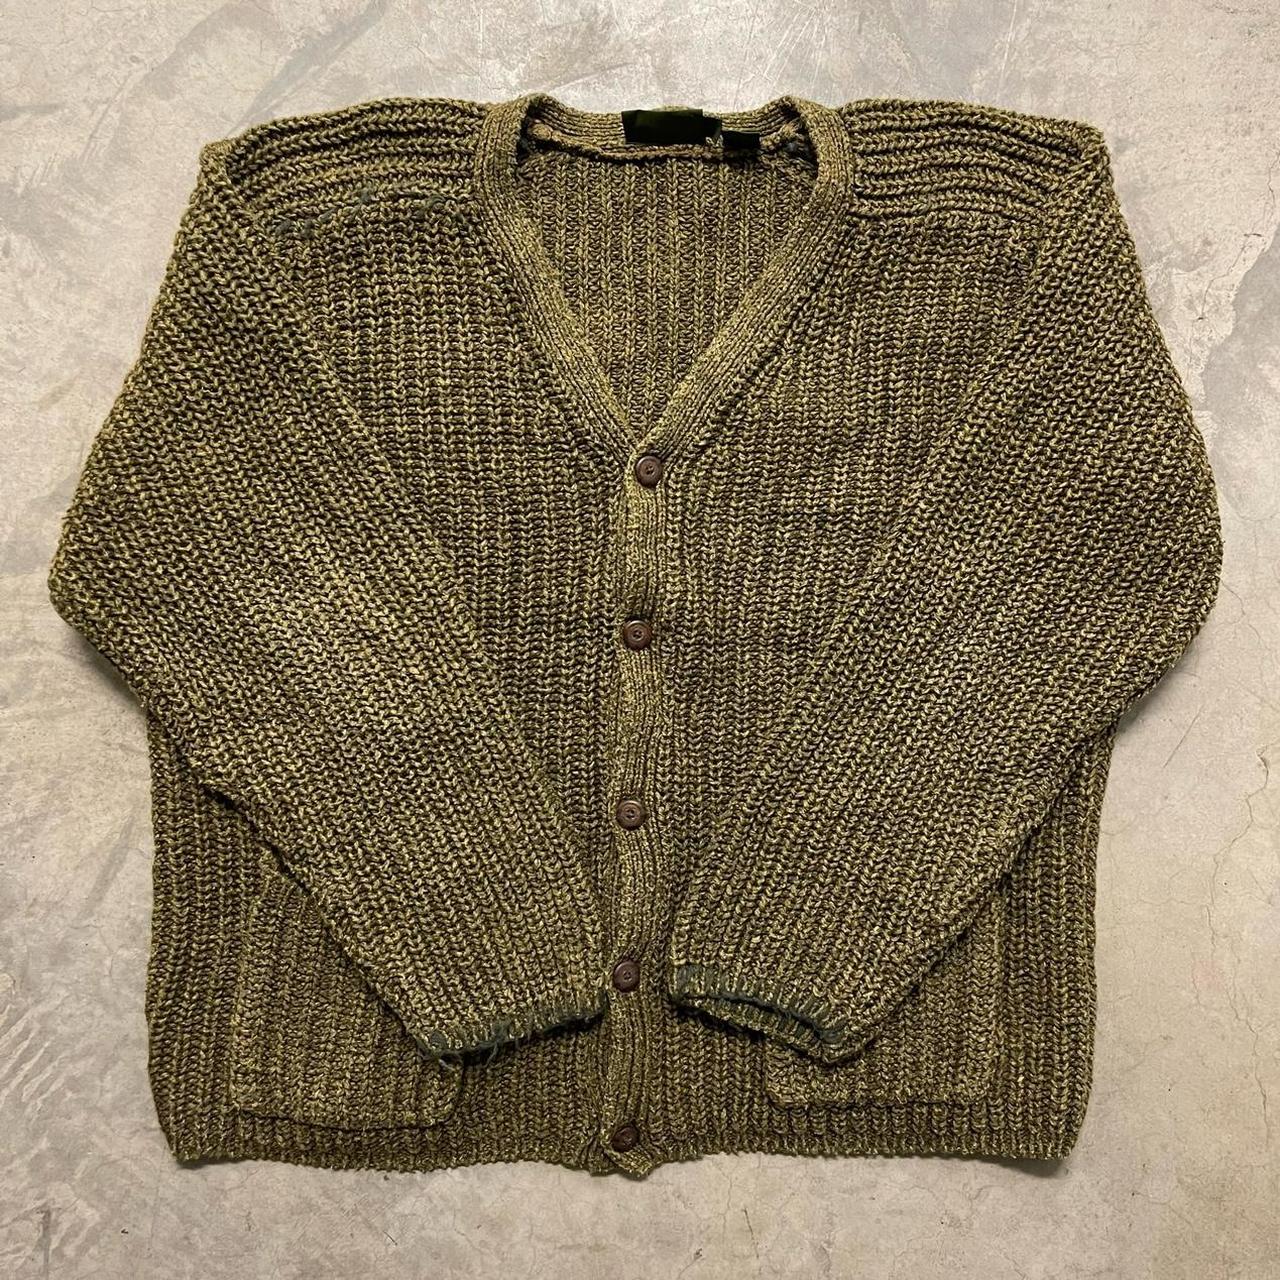 Product Image 1 - vintage timberland knitted cardigan sweater

mens